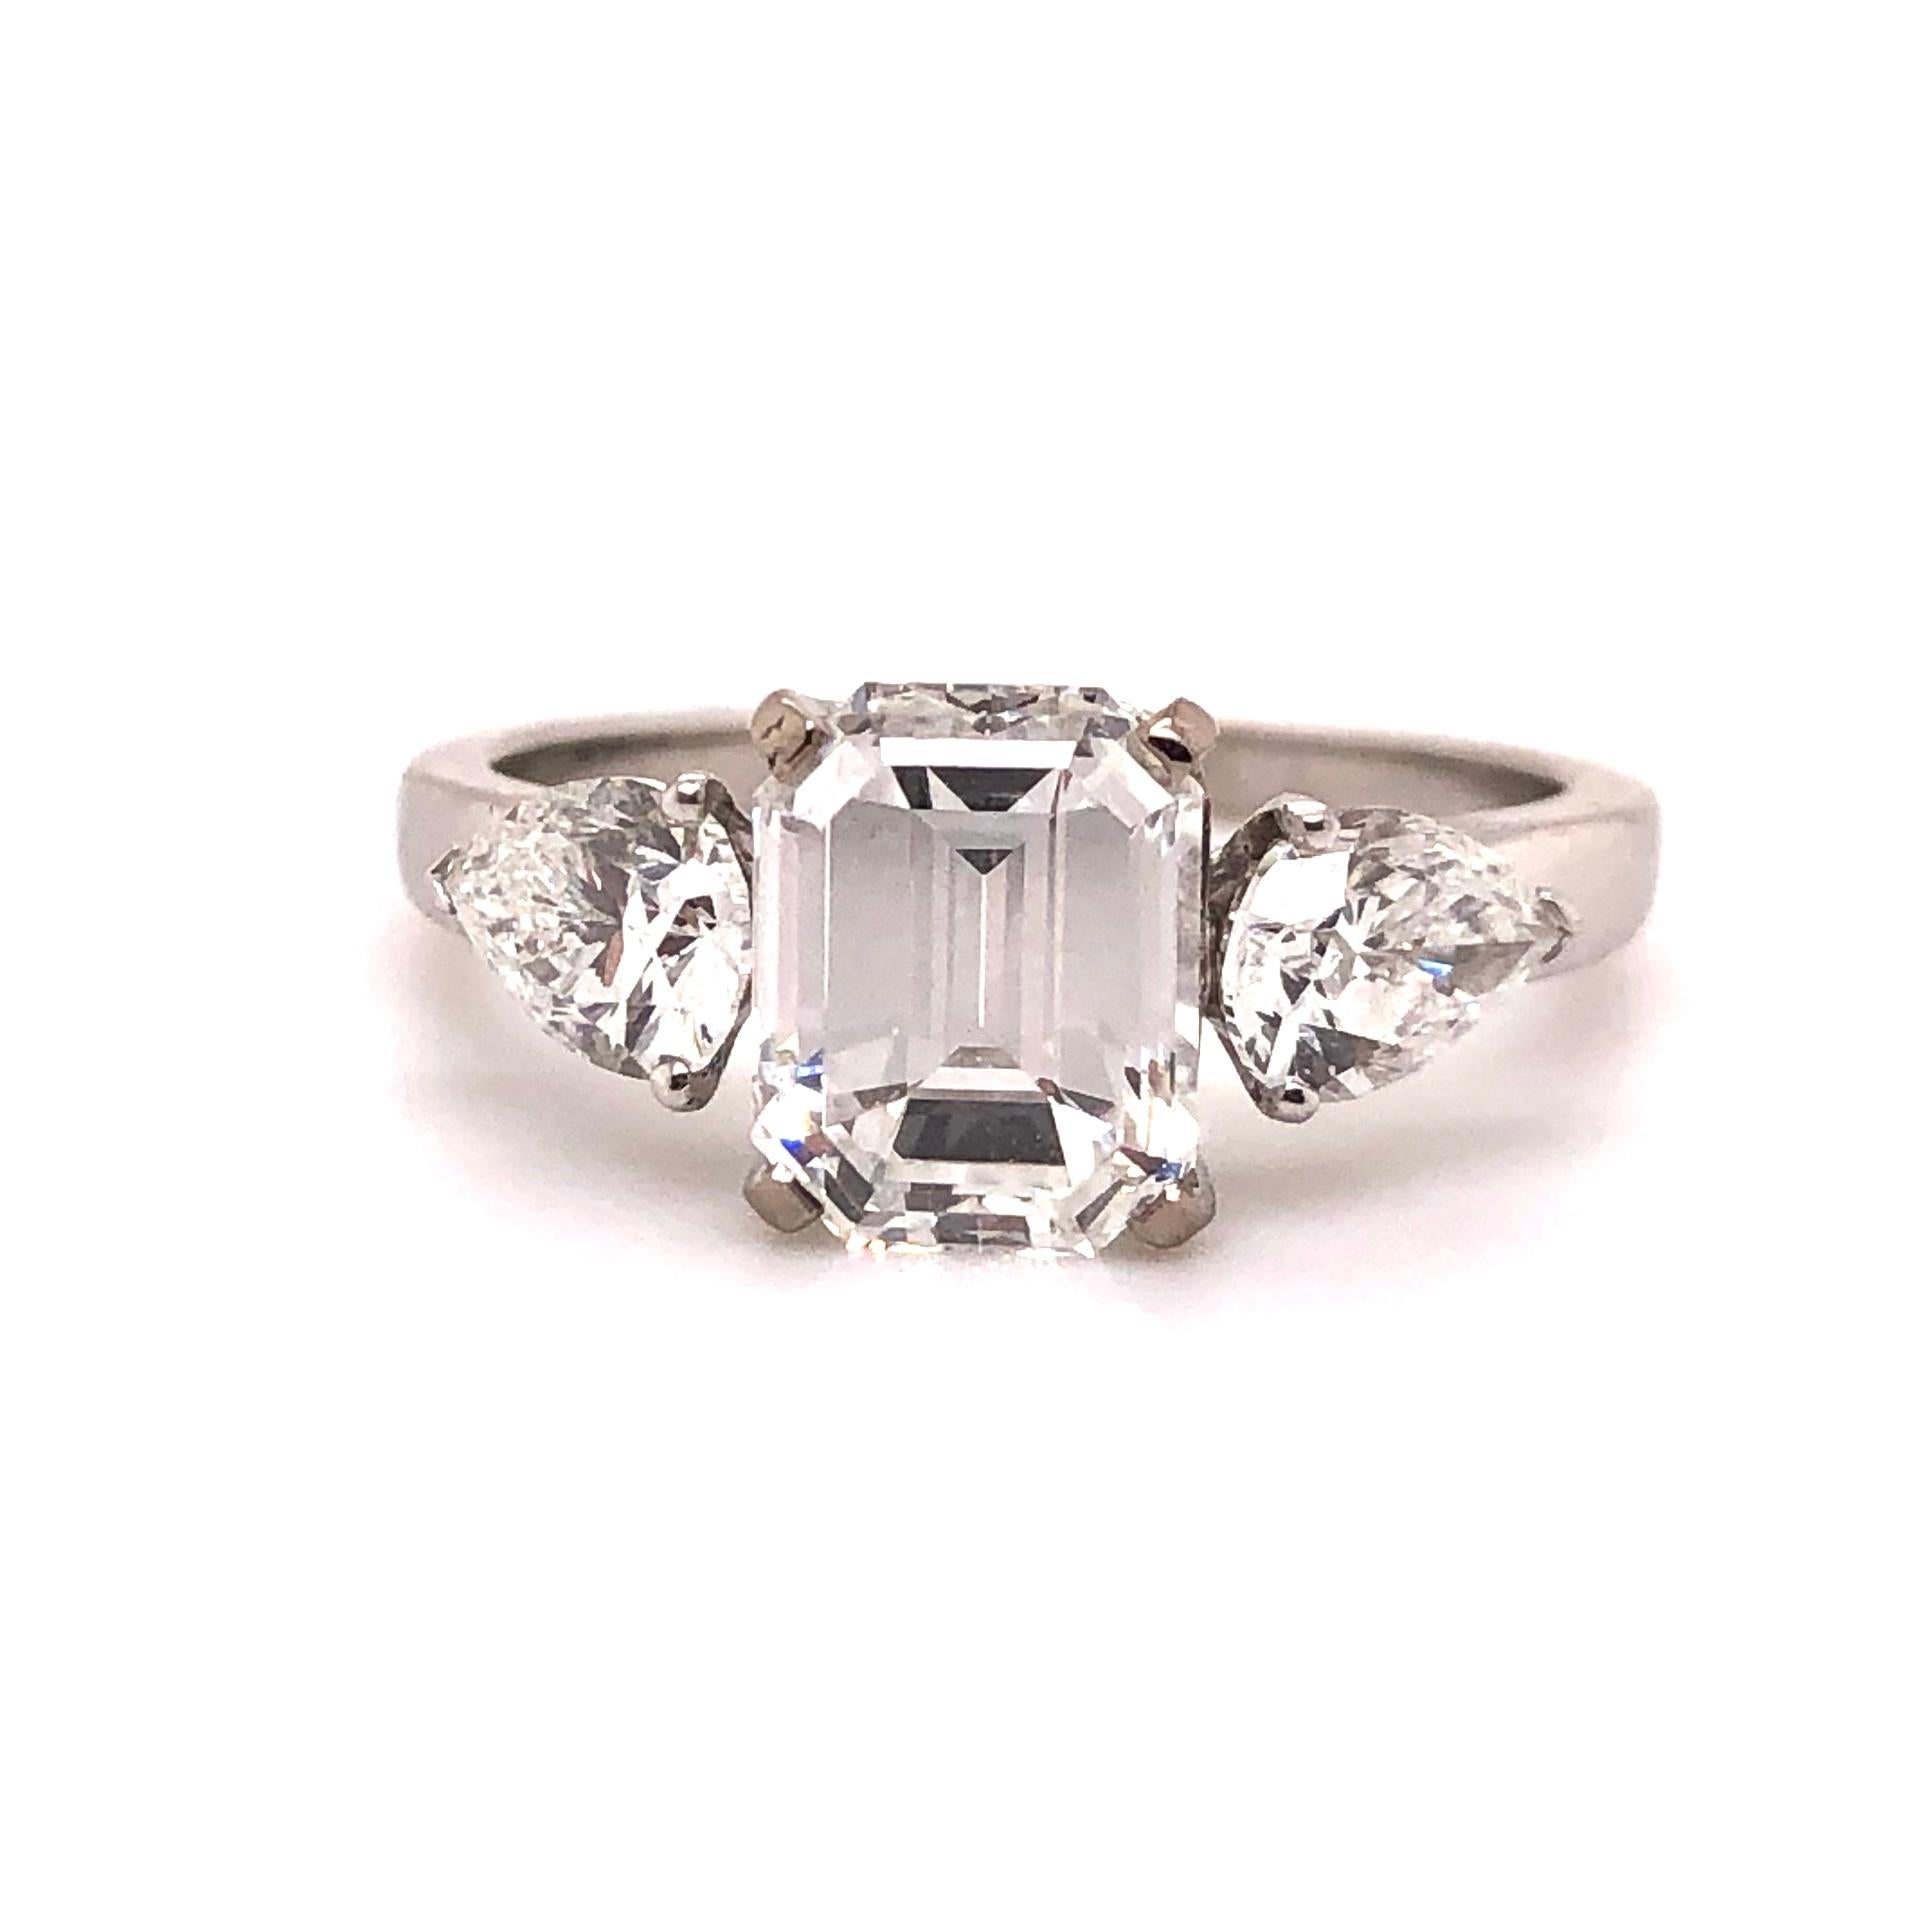 A beautiful French Diamond Ring with a very bright 1.91 carats emerald cut diamond of E VVS2 (GIA certified) and two pear-shaped diamonds of circa 1 carats. The combination of Emerald-cut and pear-shaped diamonds make it a very special and beautiful